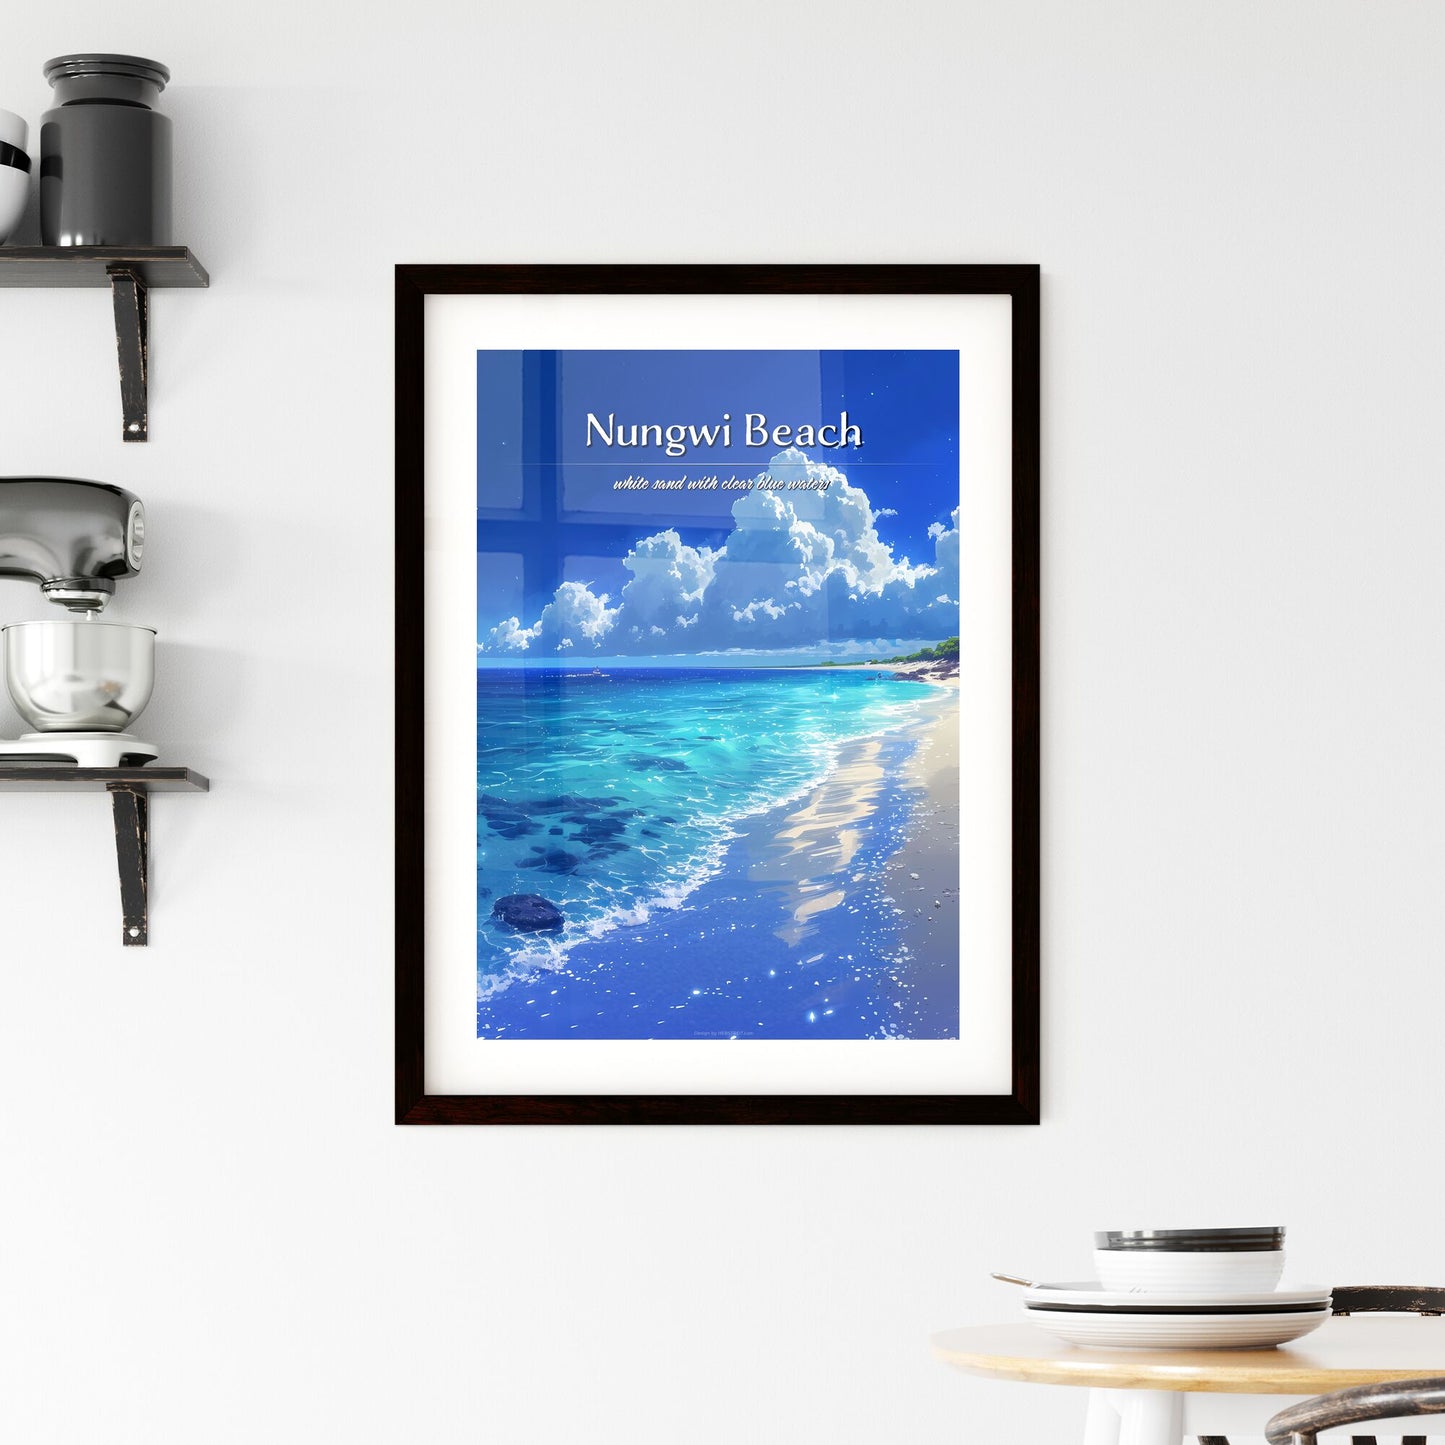 Nungwi Beach - Art print of a beach with blue water and clouds Default Title